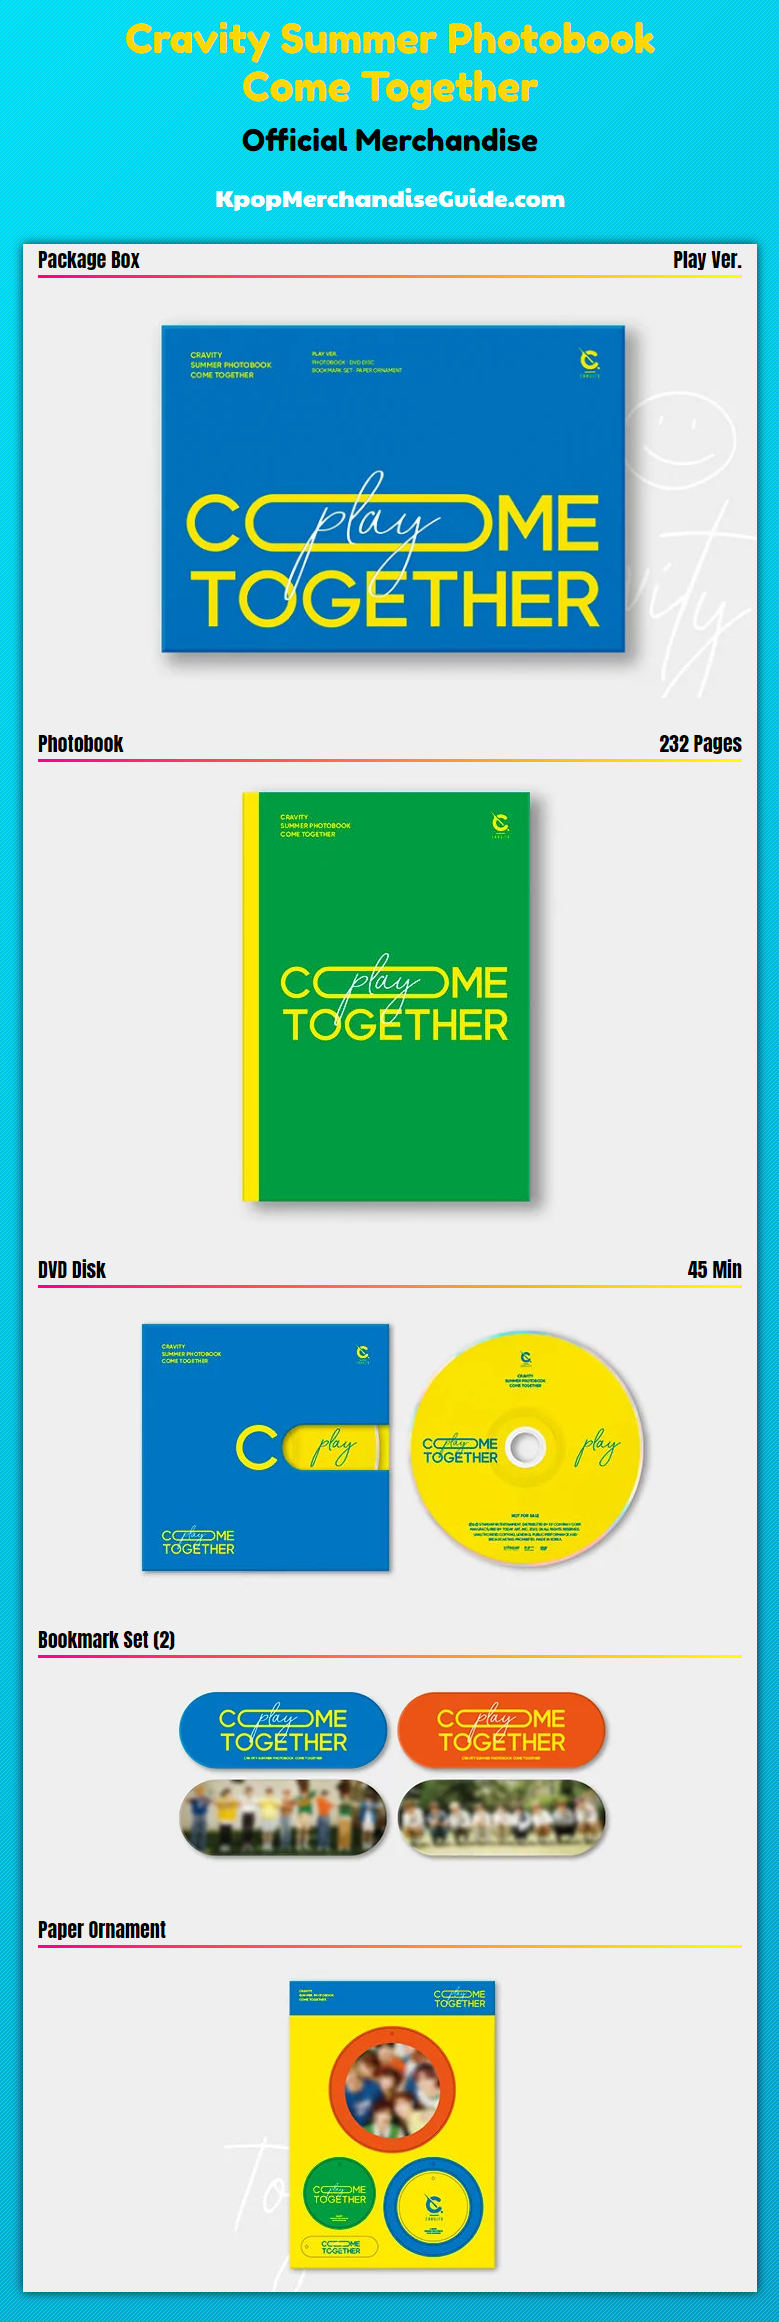 Cravity Summer Photobook Come Together